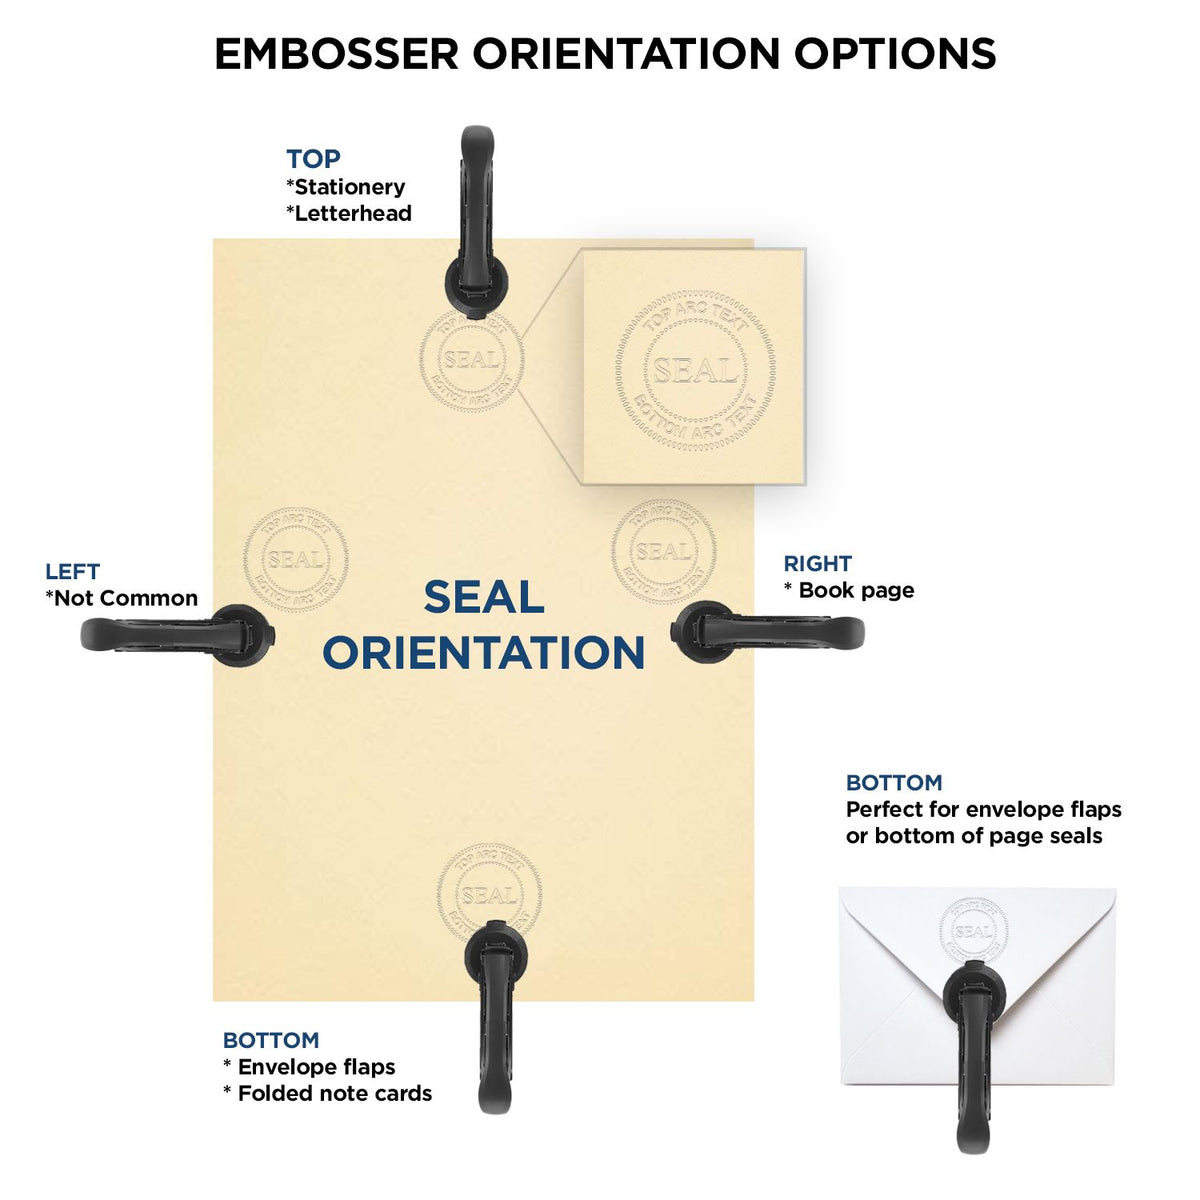 An infographic for the Handheld Kentucky Professional Engineer Embosser showing embosser orientation, this is showing examples of a top, bottom, right and left insert.